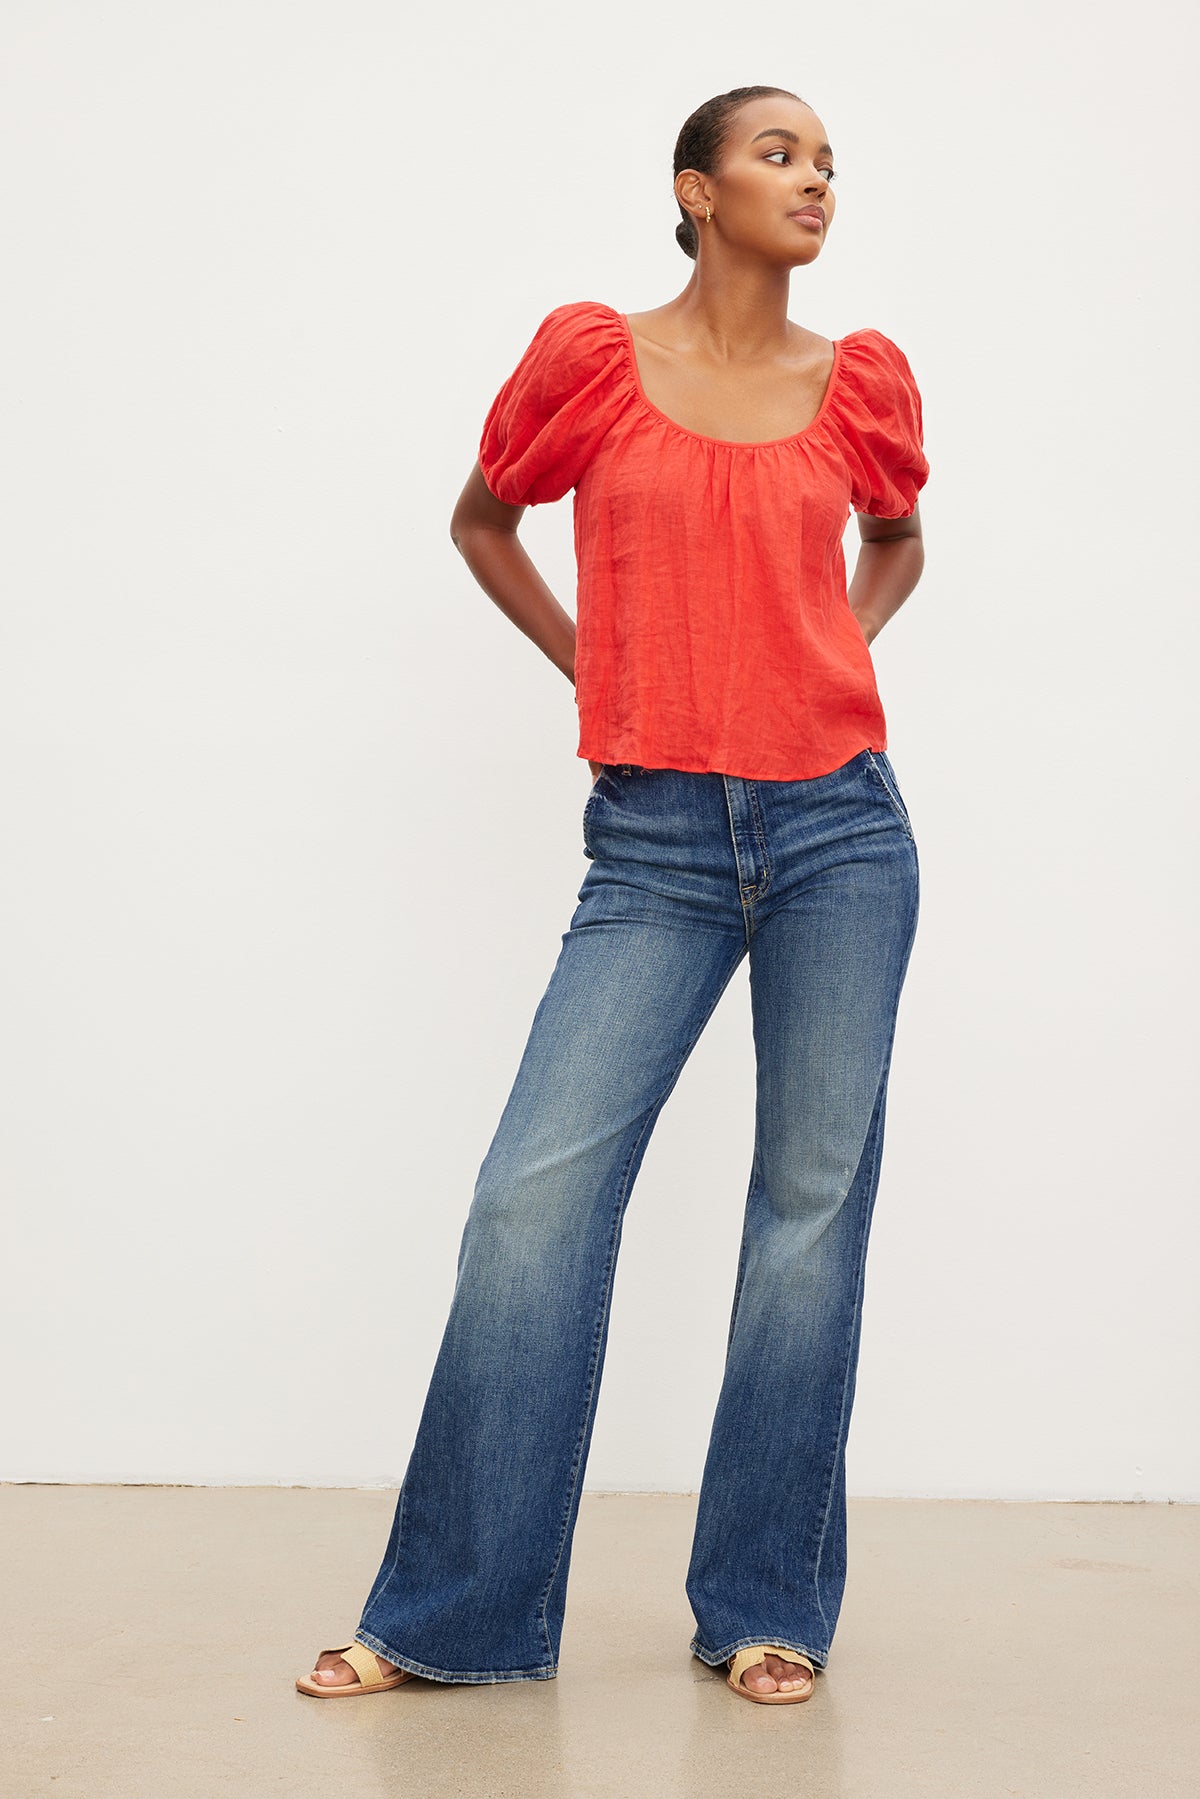 A woman wearing a Velvet by Graham & Spencer Dana Linen Scoop Neck Top and flared jeans.-35955692273857